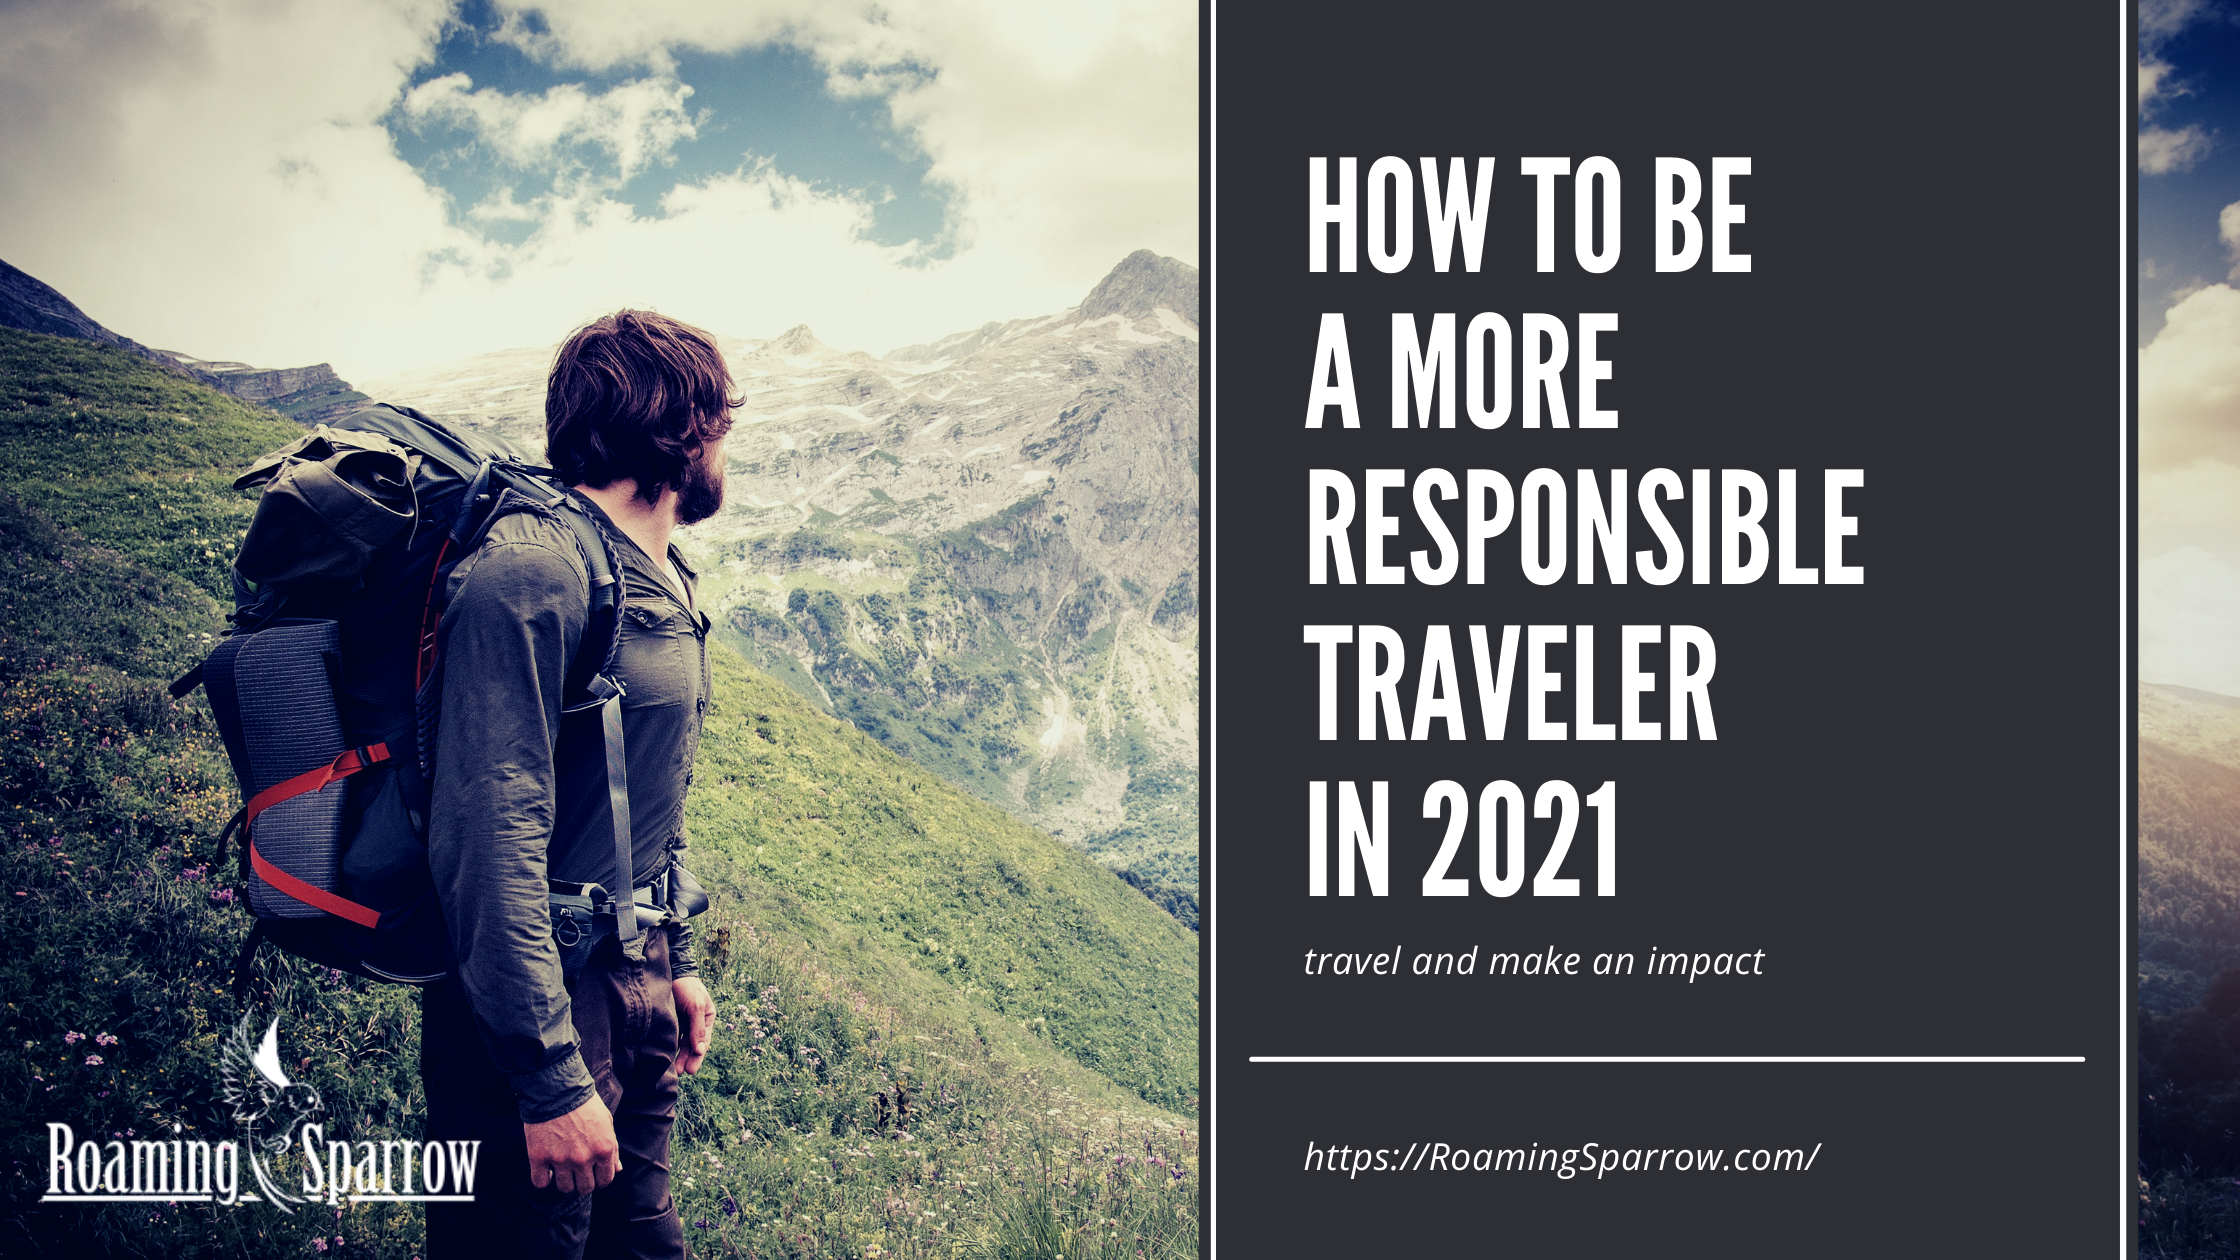 How to be a More Responsible Traveler in 2021